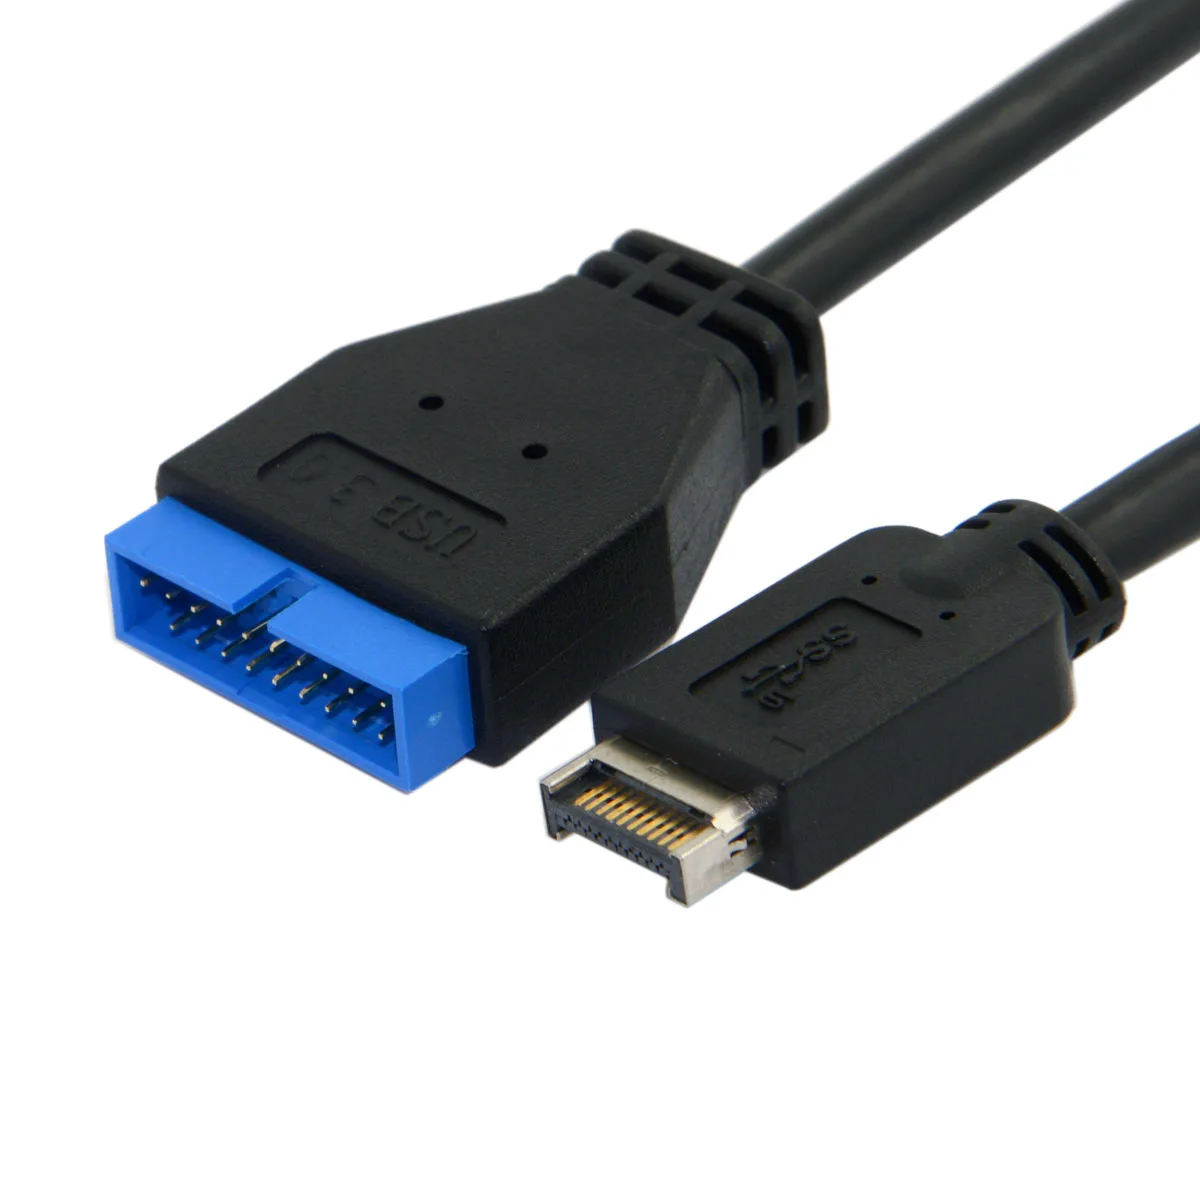 

CY USB 3.1 Front Panel Header to USB 3.0 20Pin Header Extension Cable 20cm for ASUS Motherboard